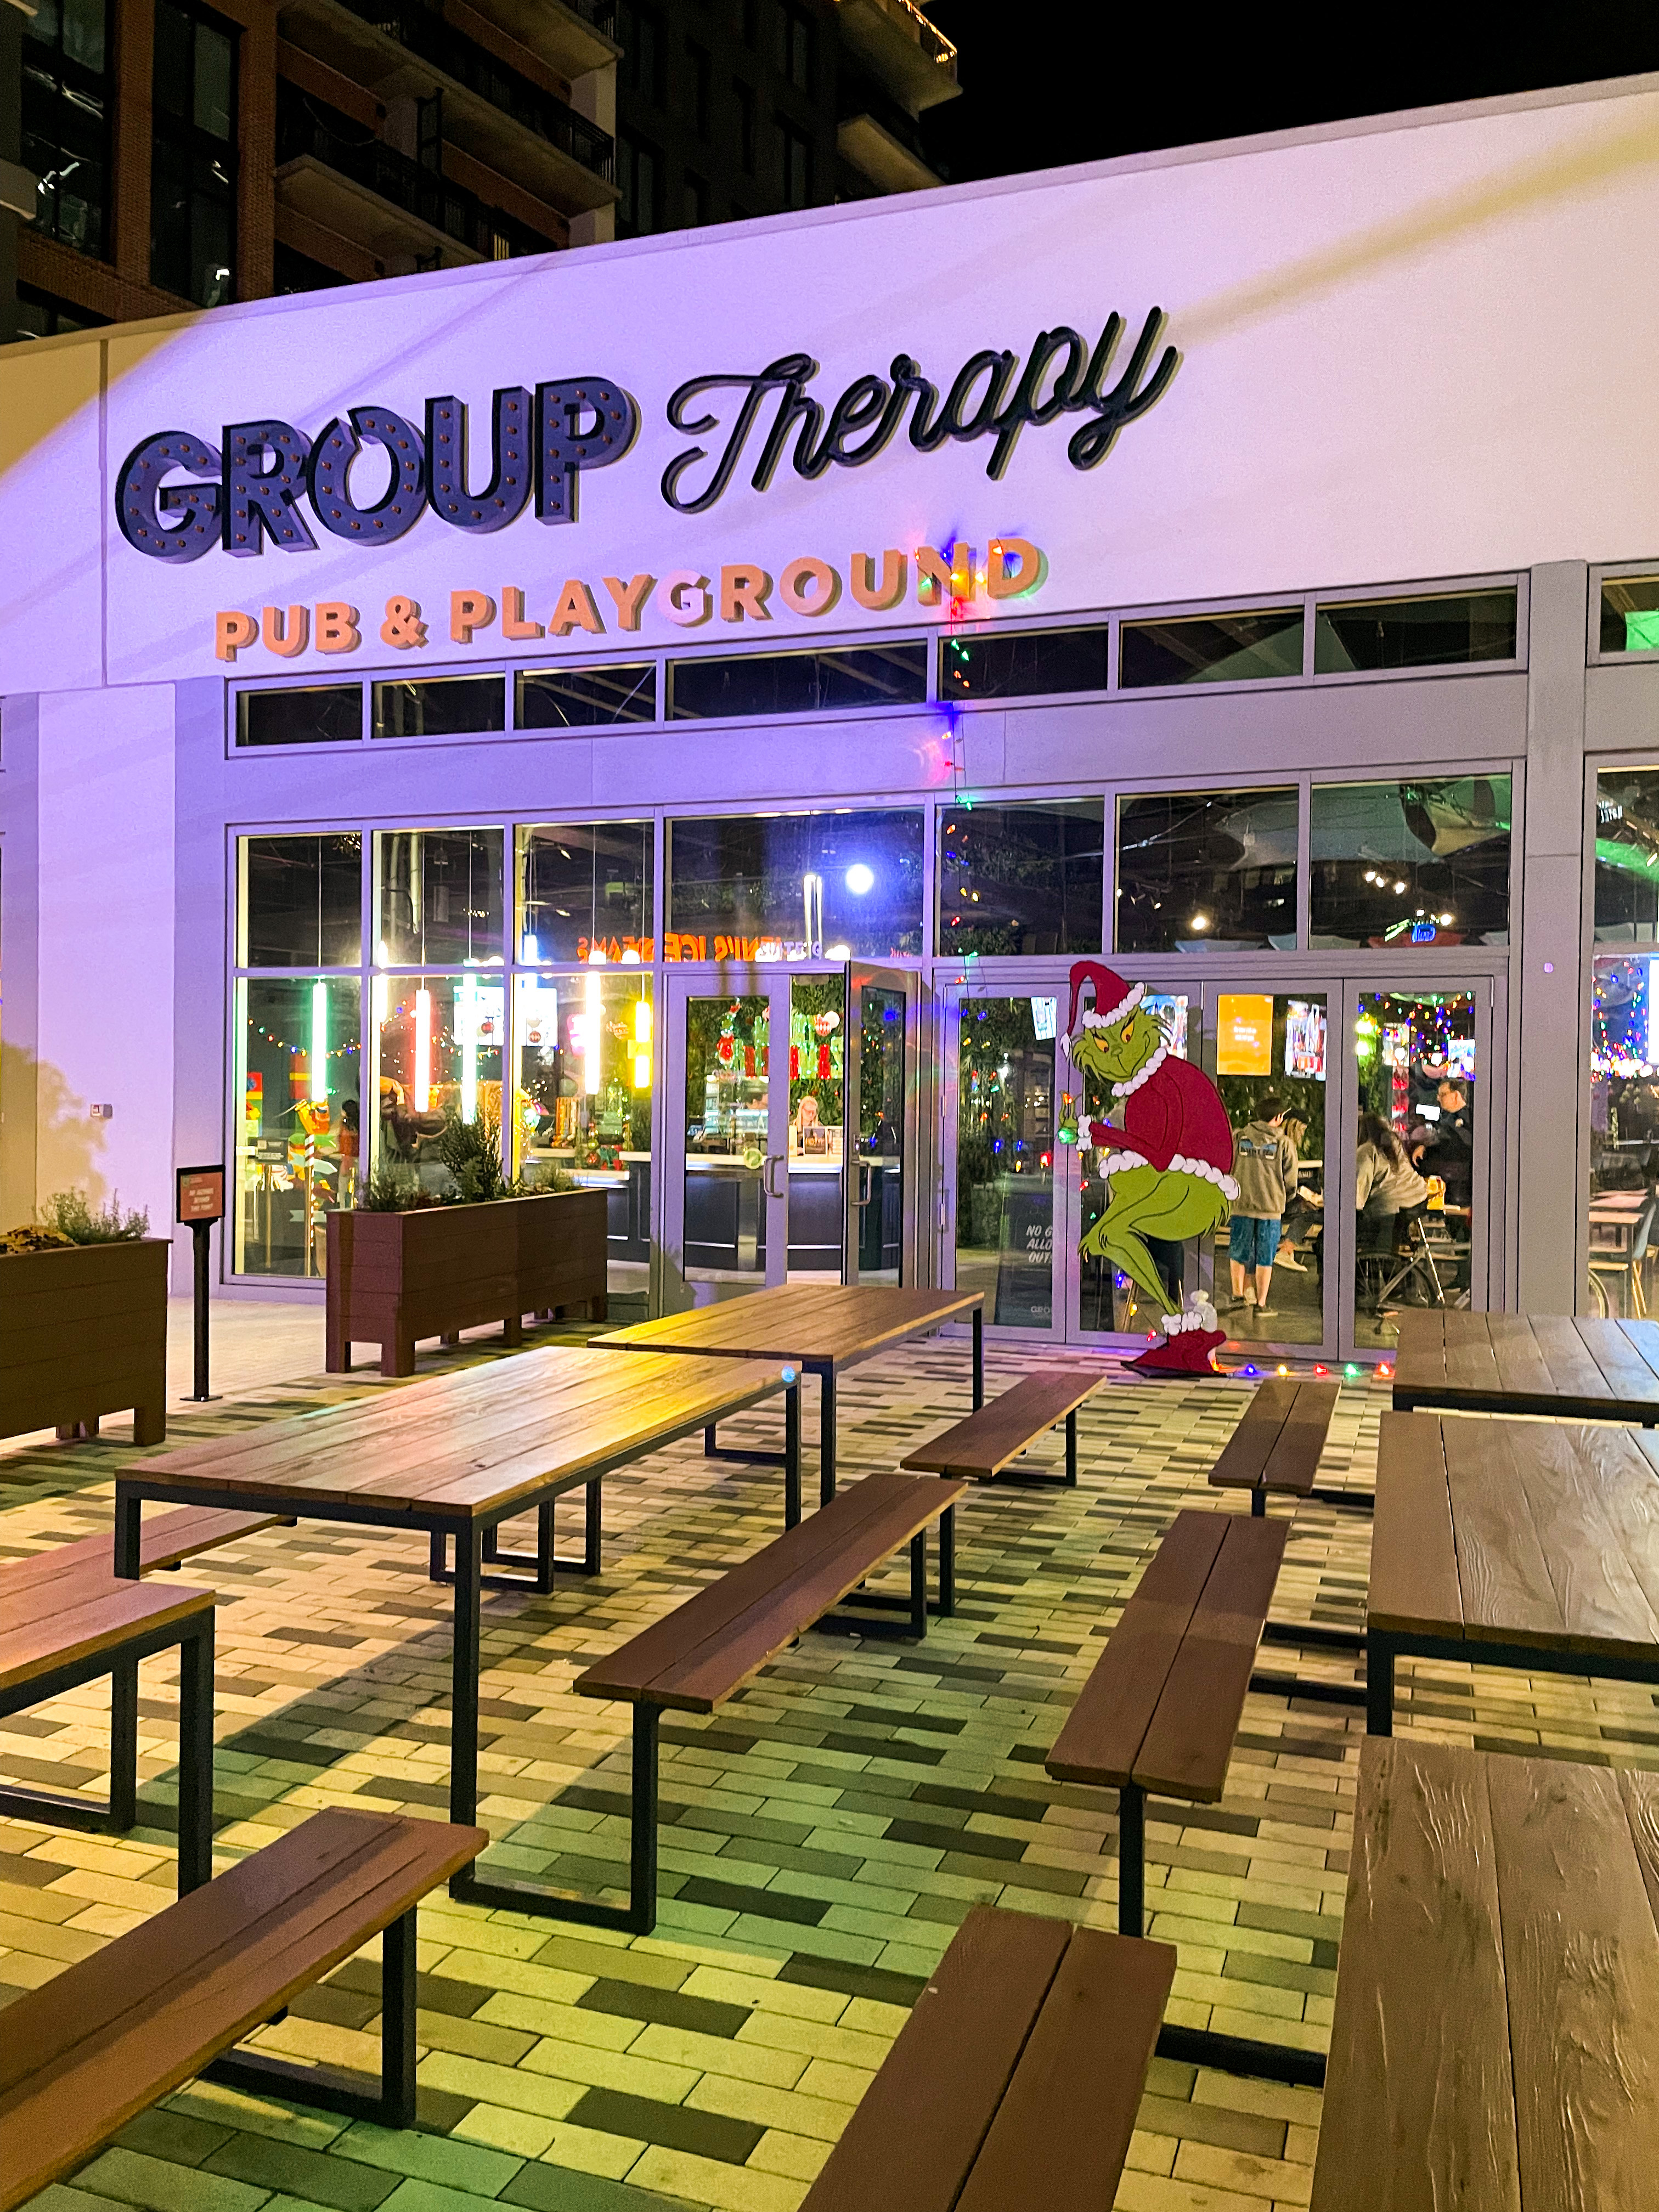 Group Therapy Pub & Playground